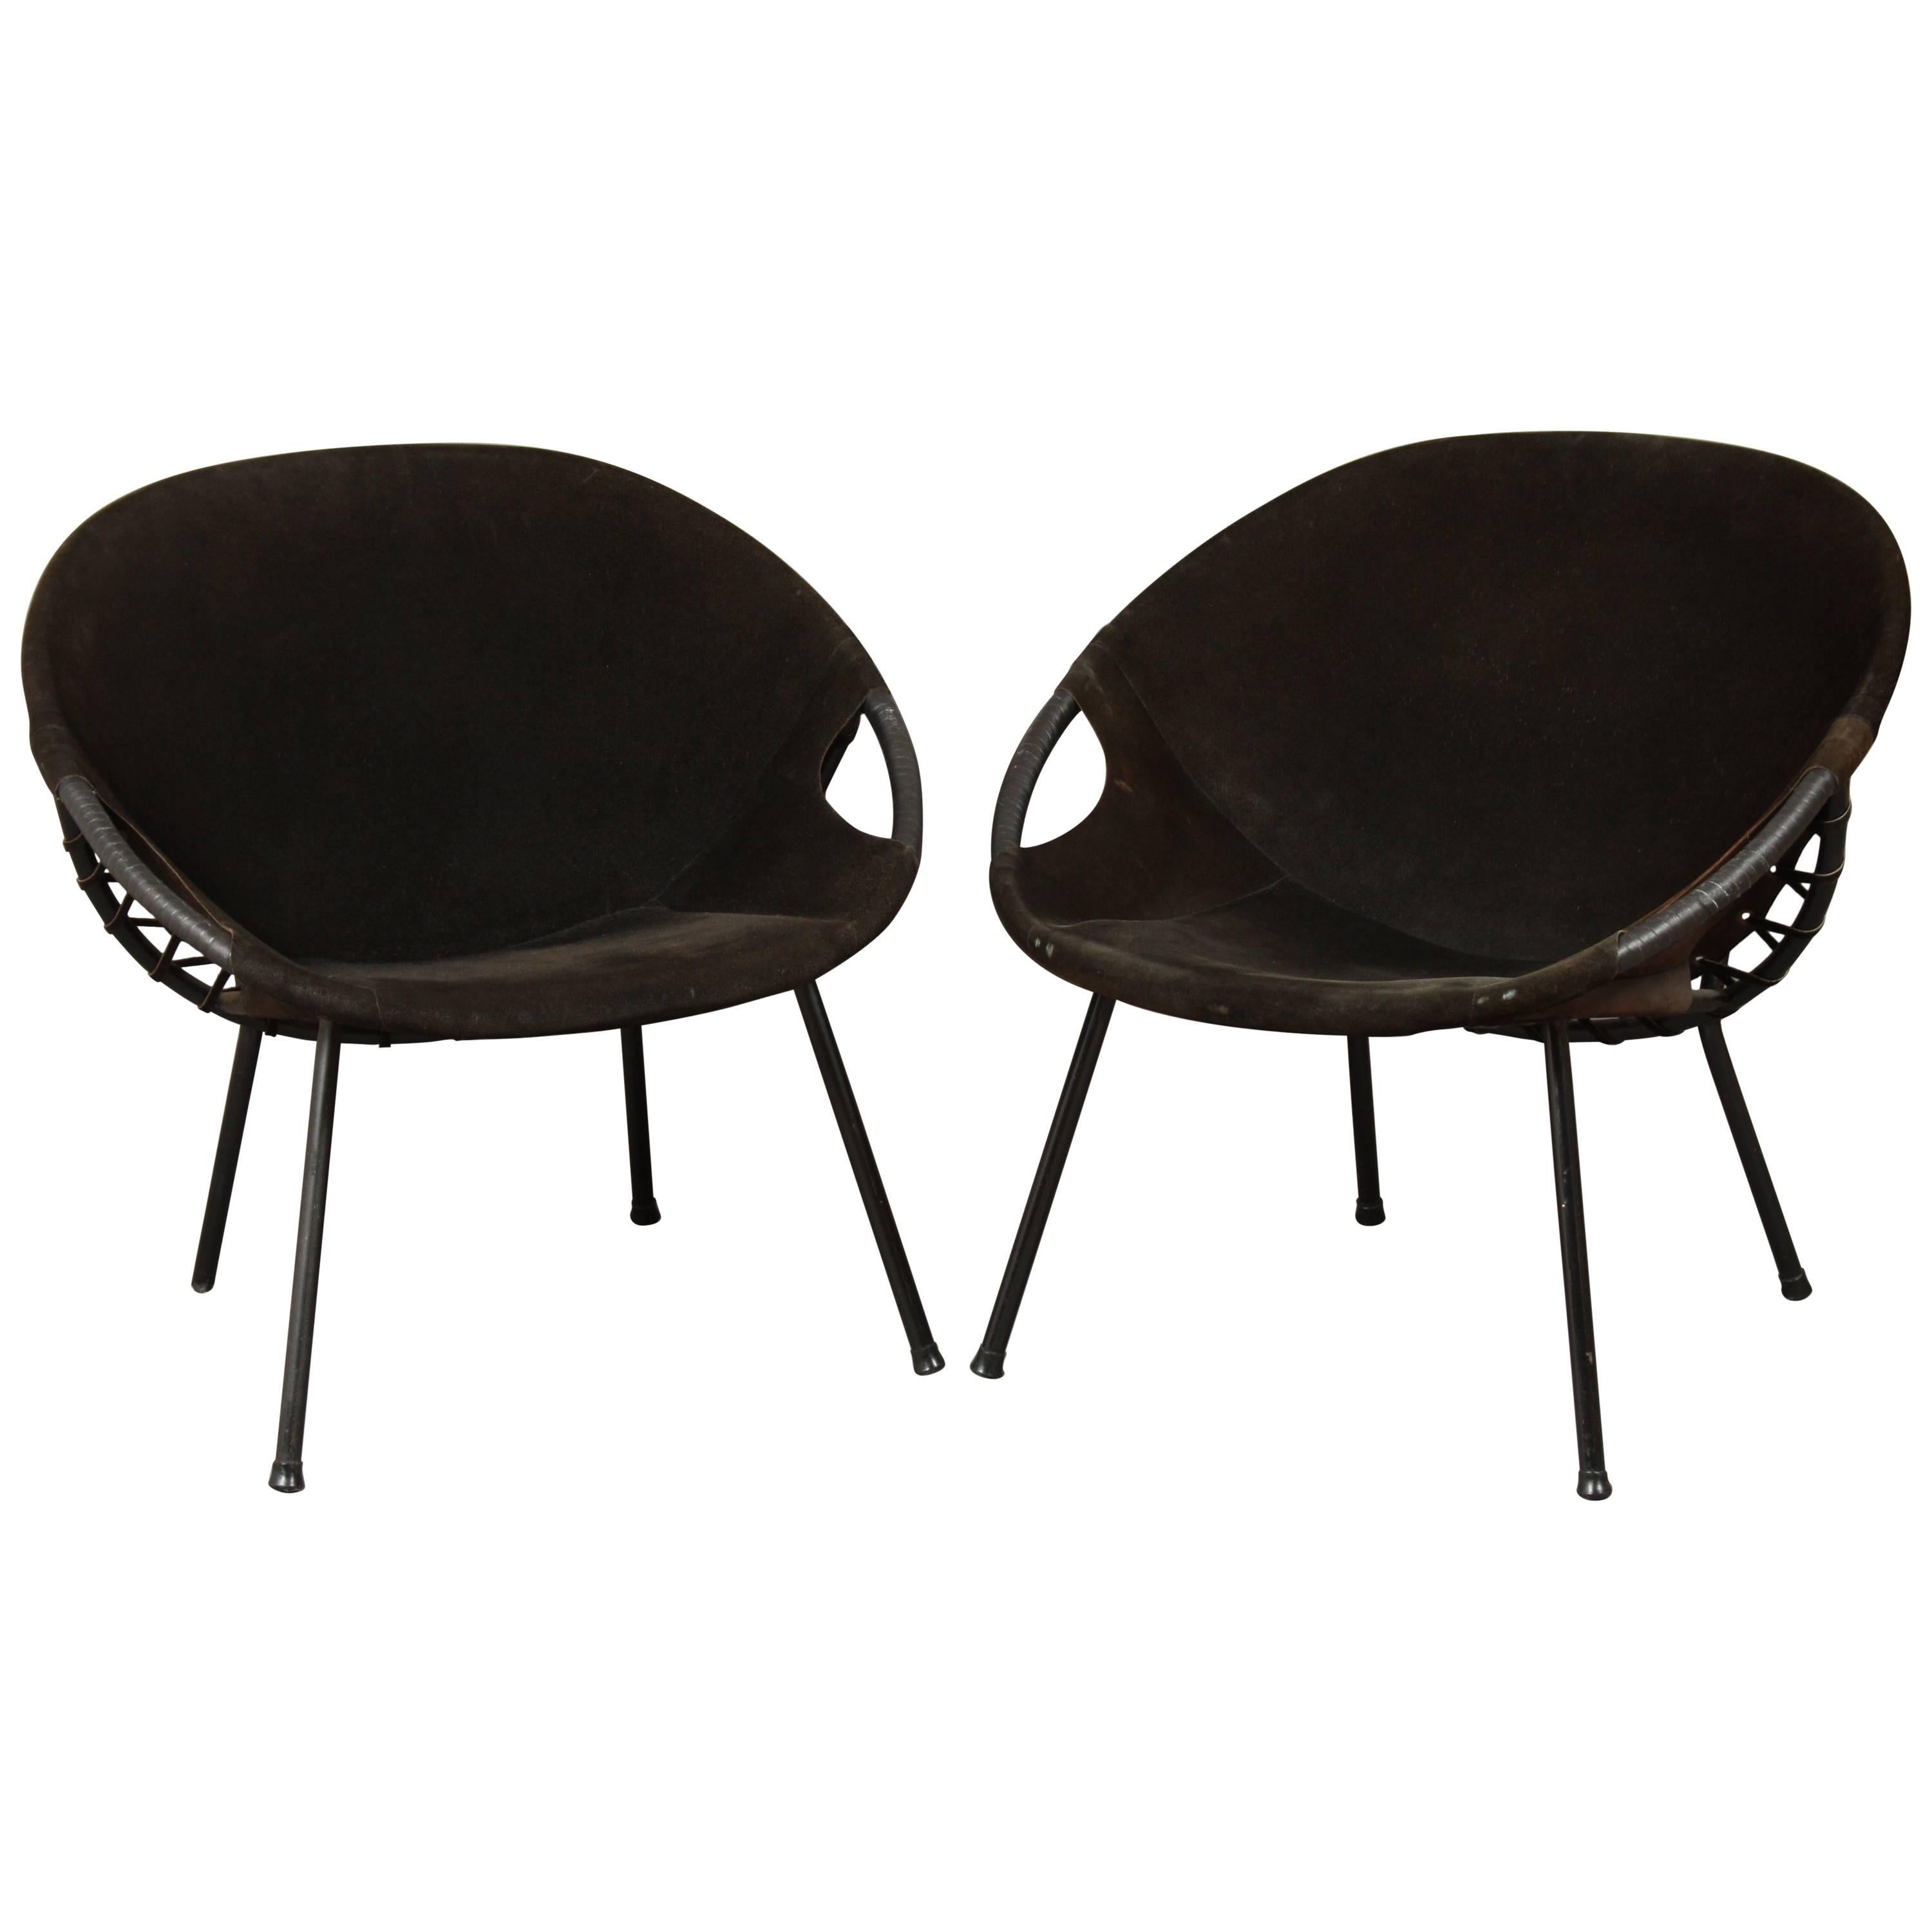 Set of Two Dark Brown Circle Armchairs by Lusch Erzeugnis, 1960s For Sale